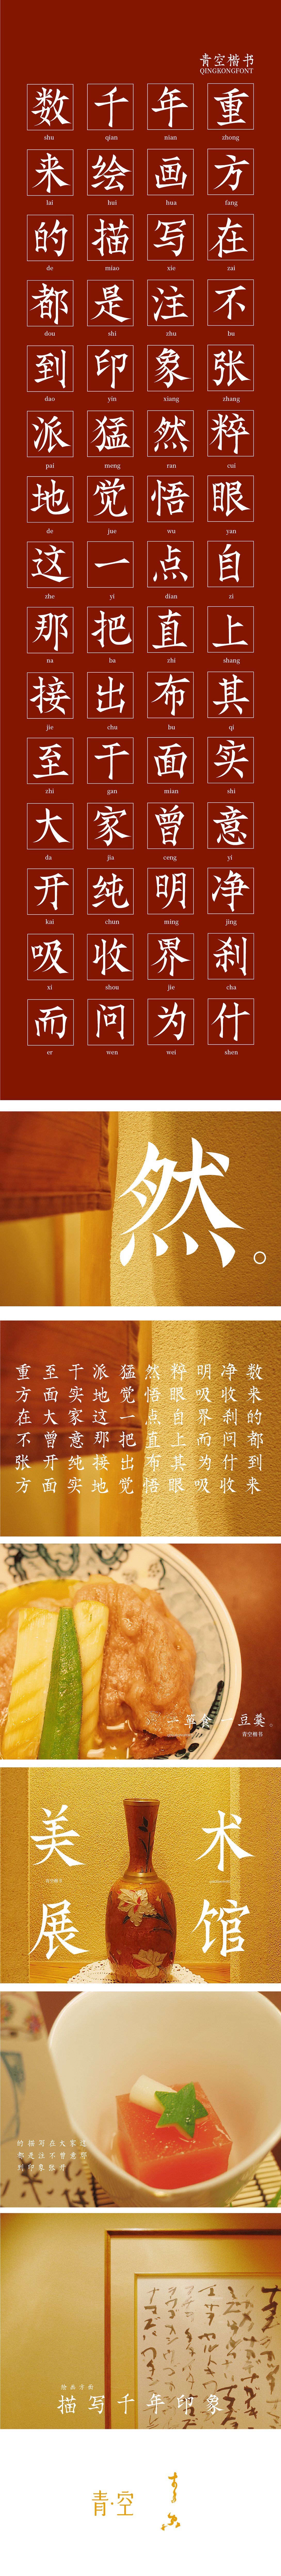 Chinese Creative Font Design-Draw strokes from calligraphy, and set the radicals in Qingkong regular script